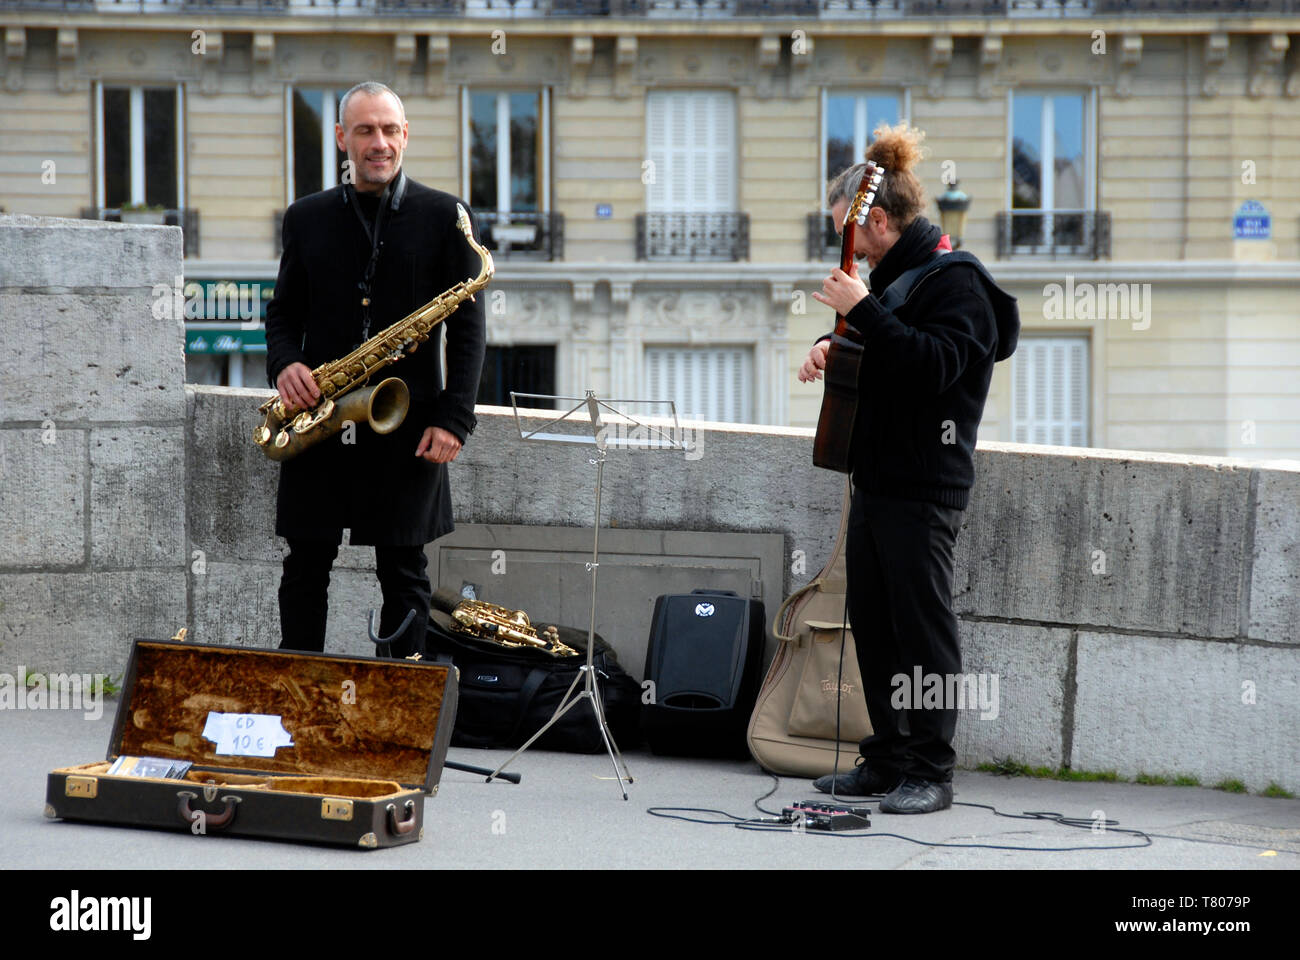 Two buskers performing in the street in Paris, France, with a variety of instruments and selling CDs Stock Photo